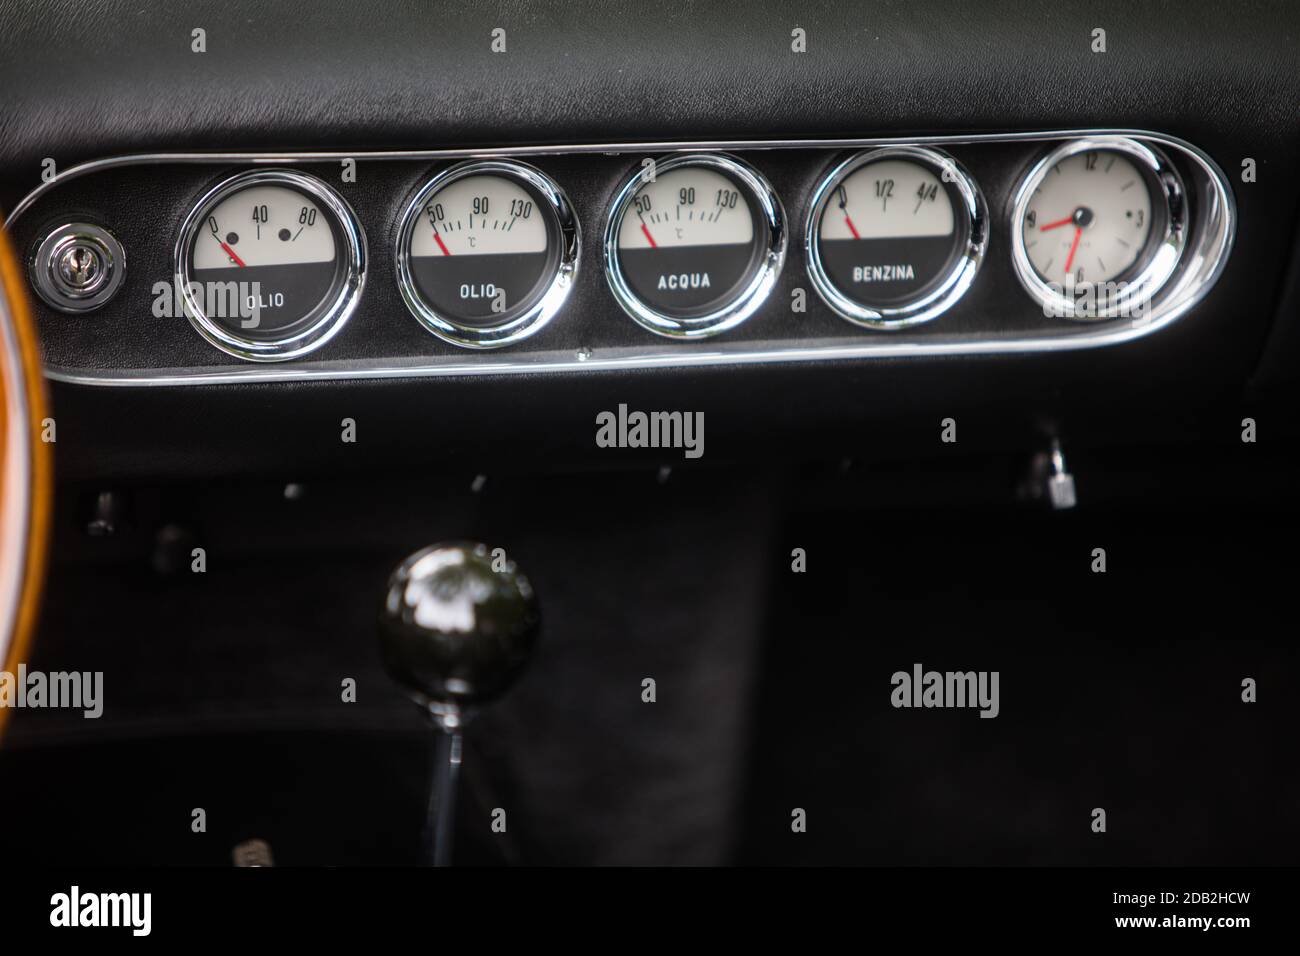 https://c8.alamy.com/comp/2DB2HCW/color-close-up-shot-of-a-clock-fuel-level-and-thermometer-on-a-vintage-cars-dashboard-2DB2HCW.jpg